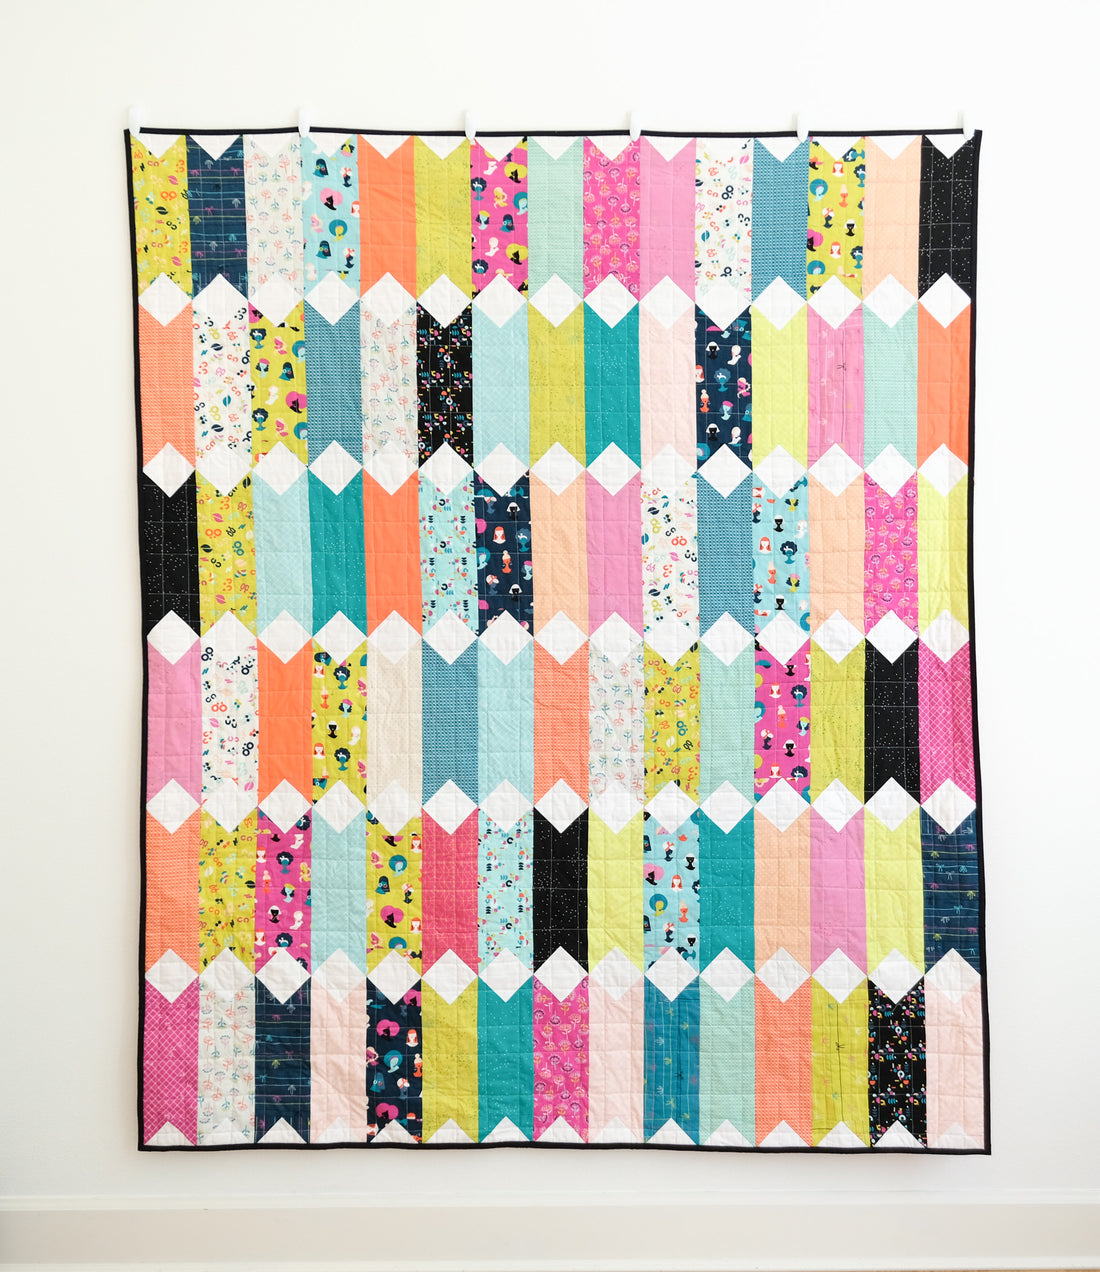 The Virginia Quilt Paper Pattern